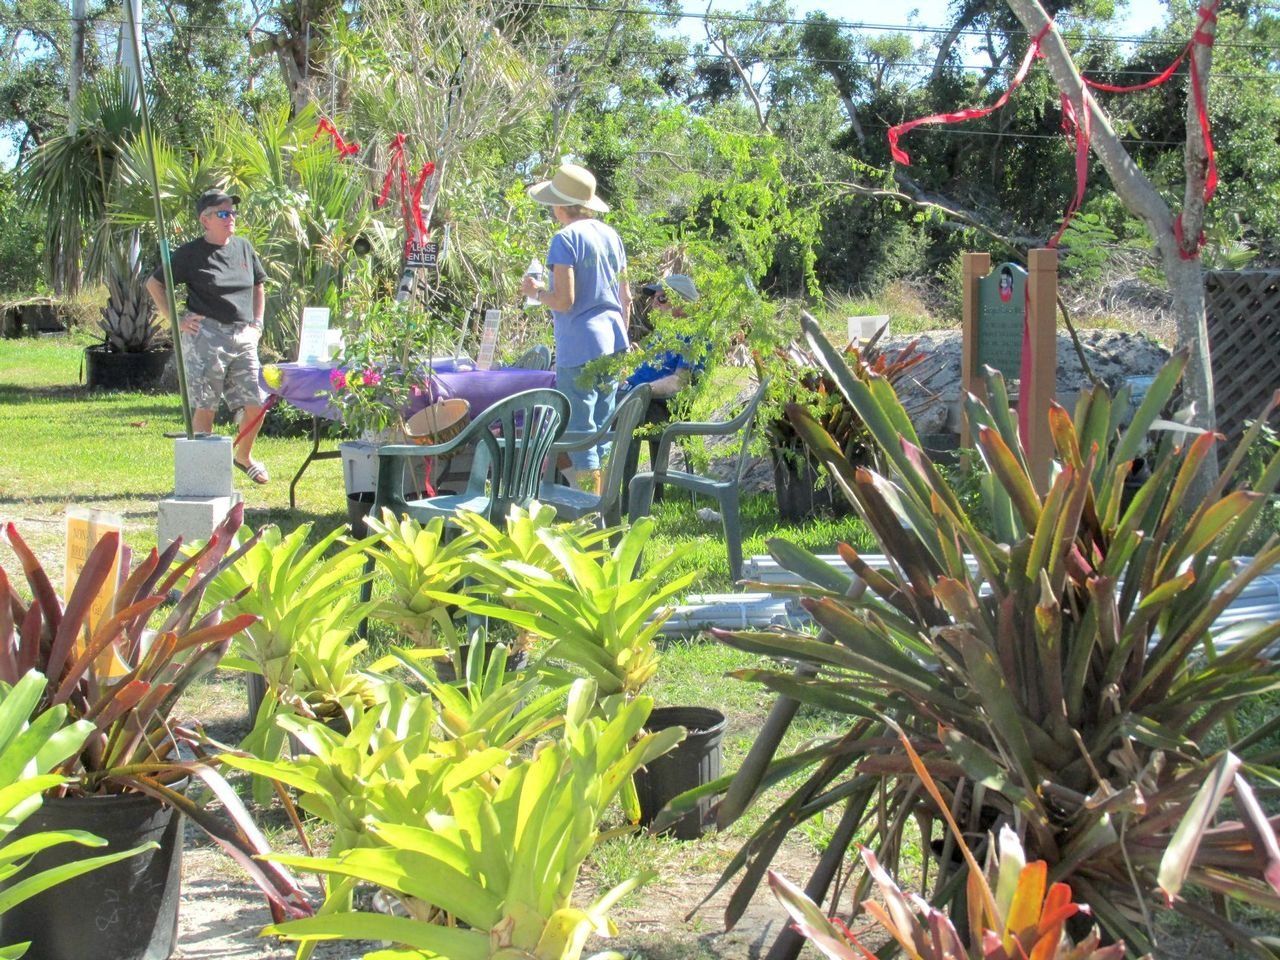 Nature lovers can enjoy an exhibition and sale of rare plants, explore the unique Key West Tropical Forest & Botanical Garden and discover fine arts and crafts during the 20th annual GardenFest Key West: The Green Market Place.